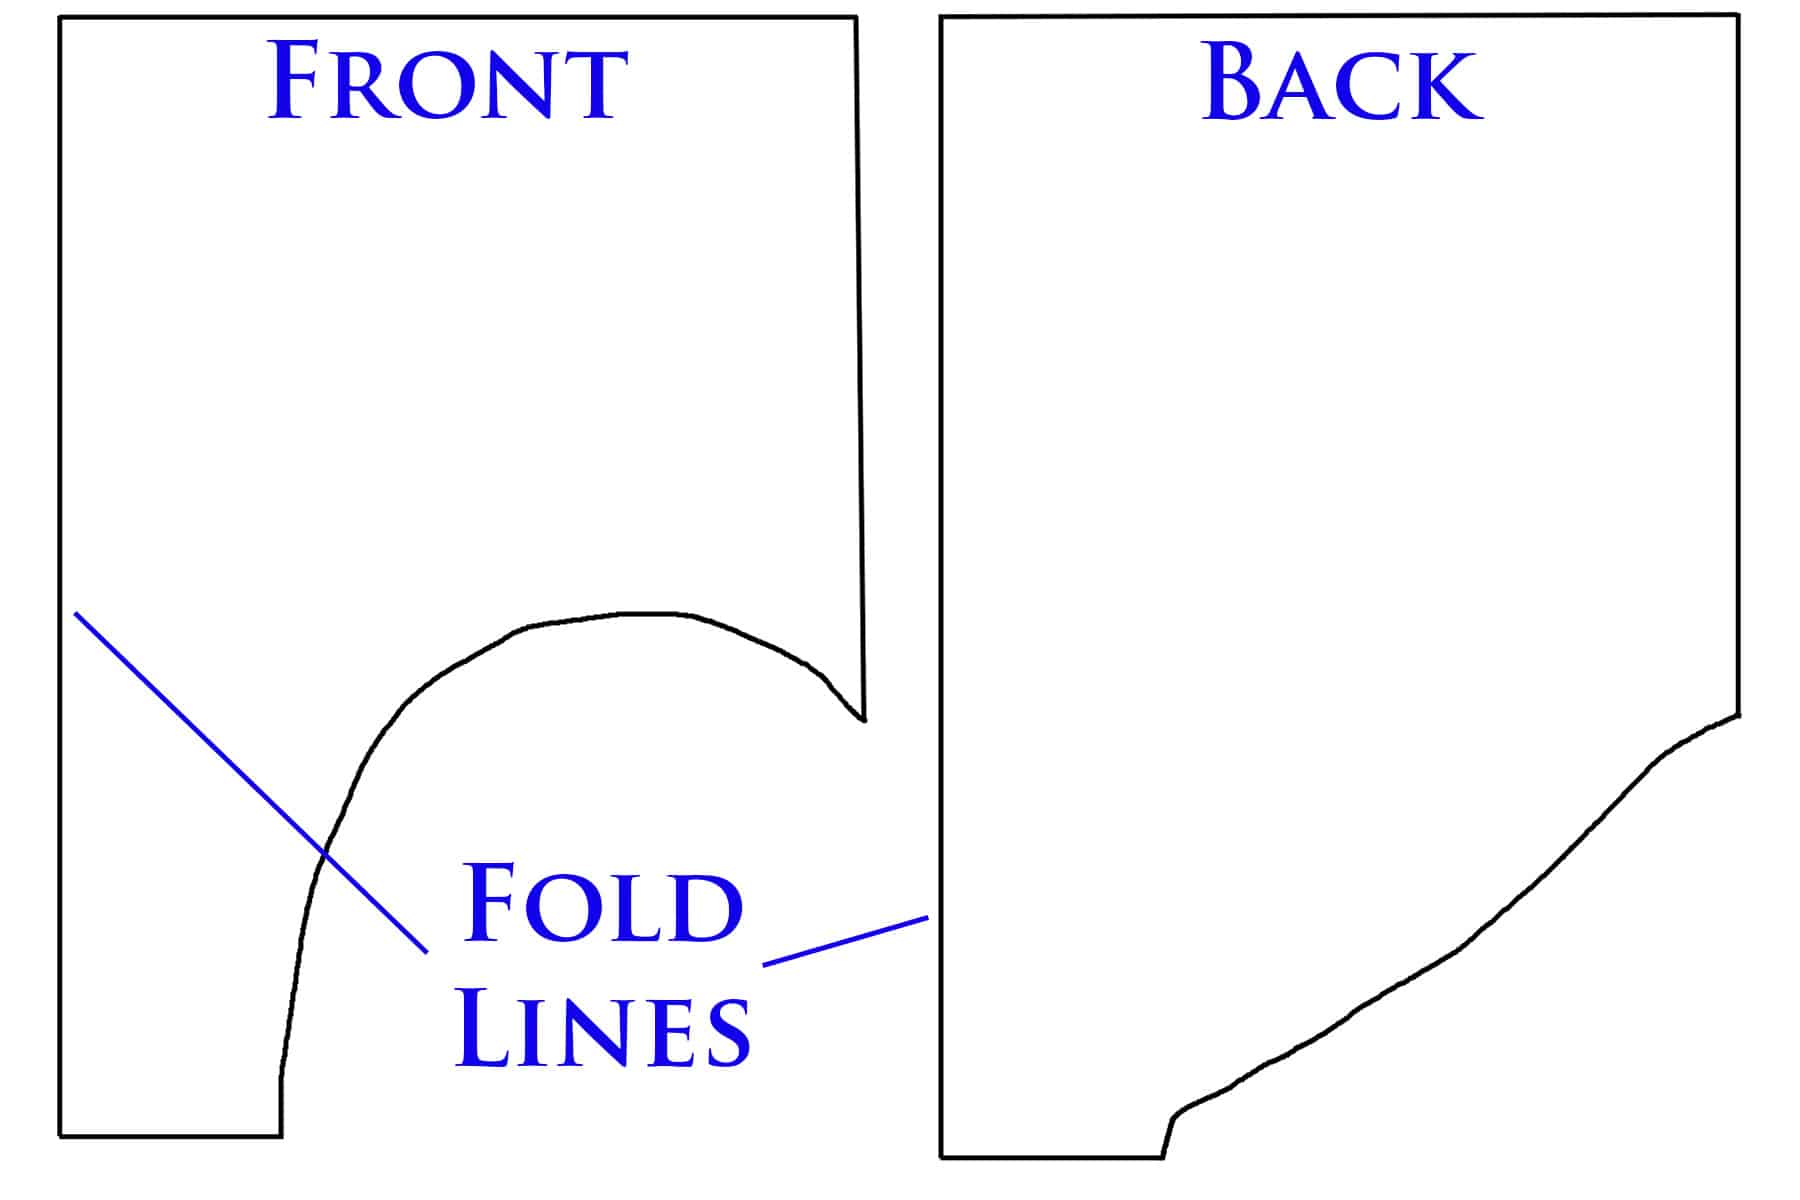 A sketch showing front and back views of a briefs pattern.